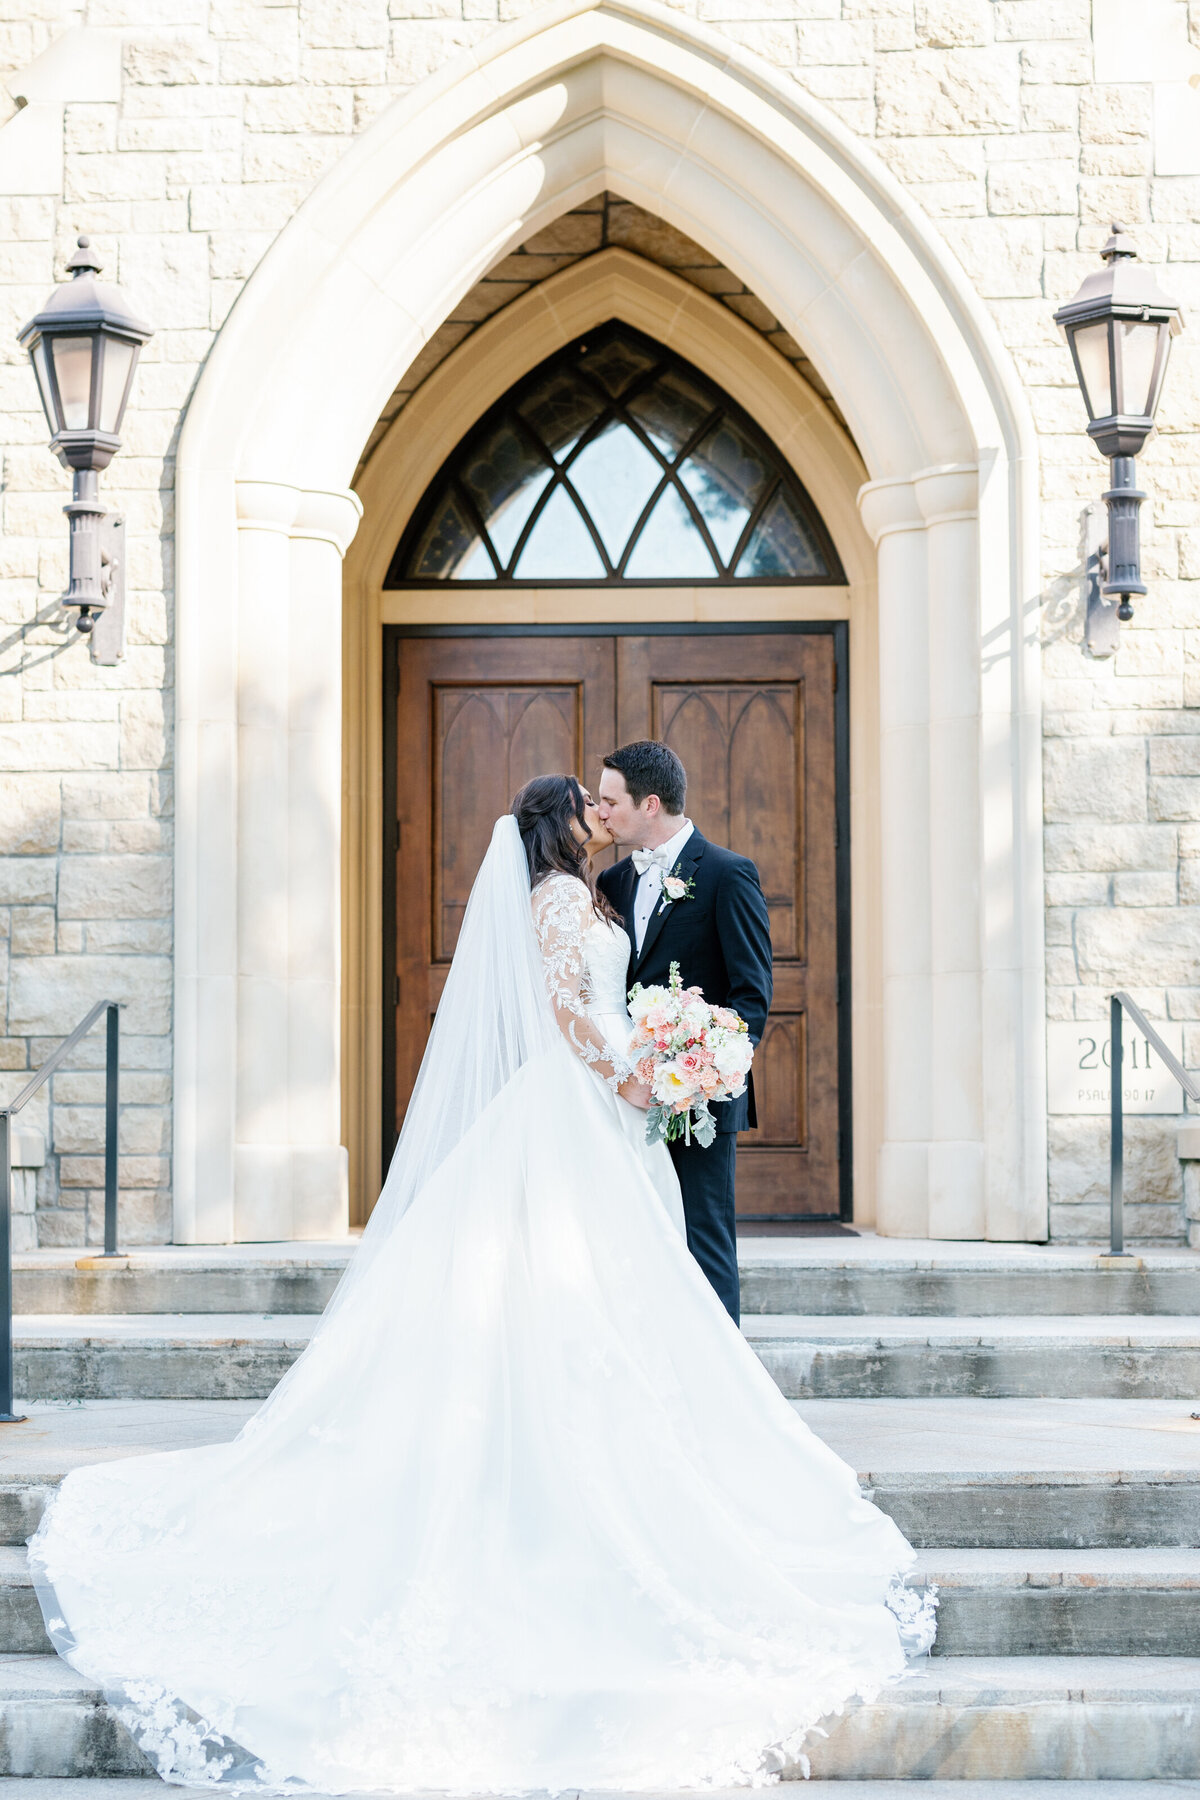 Ellen and Austin - Lee Chapel and Black Fox Farms - East Tennessee and World Wide photographer - Alaina René Photogrpahy-88